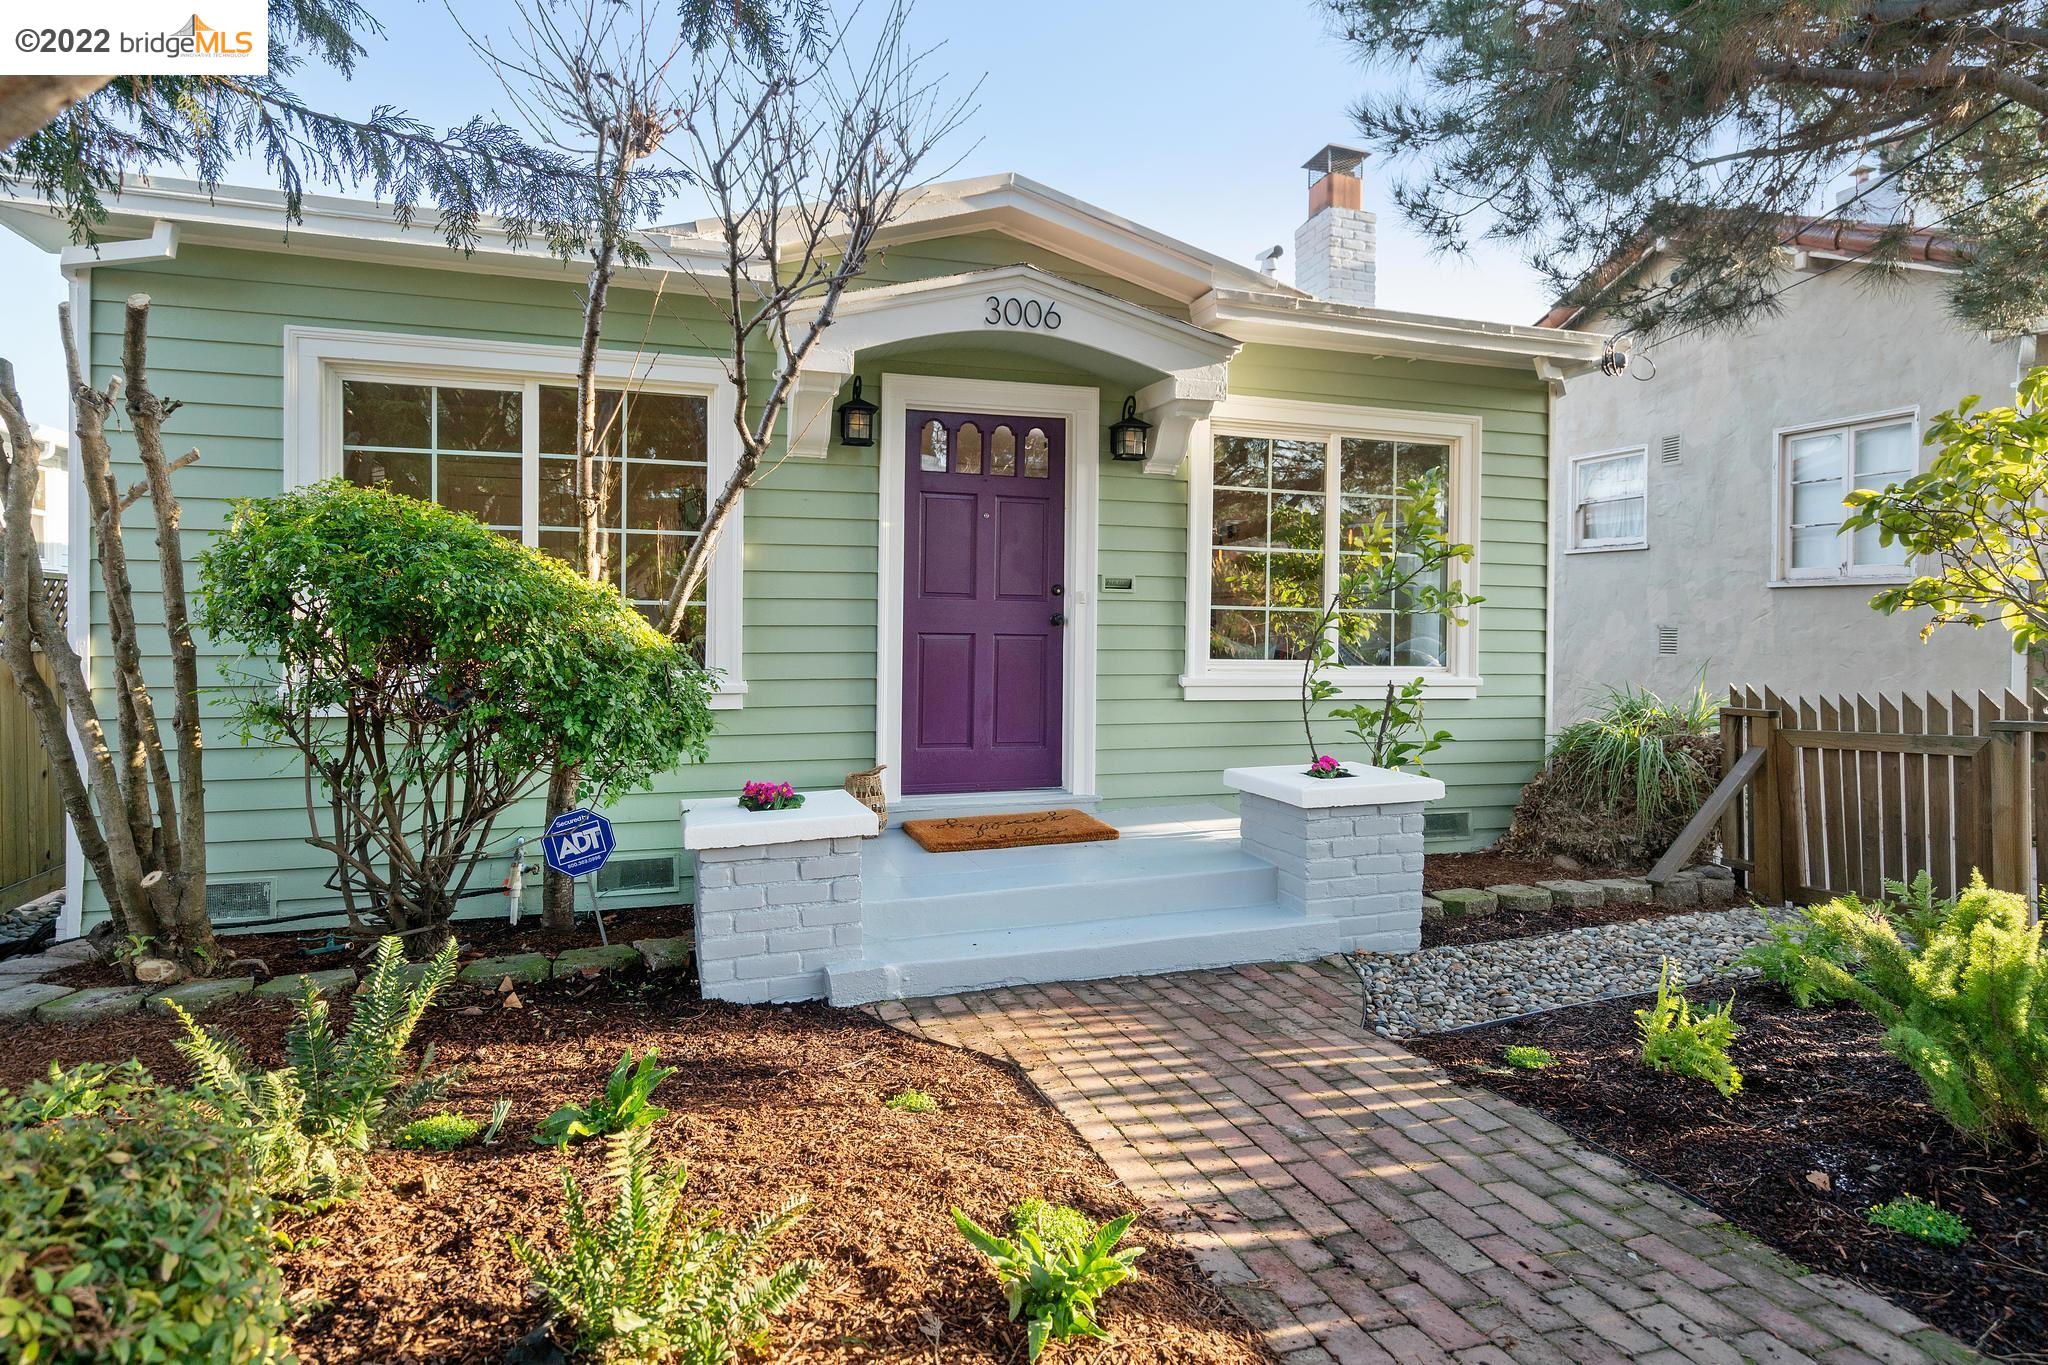 Photo of 3006 Morcom Ave in Oakland, CA